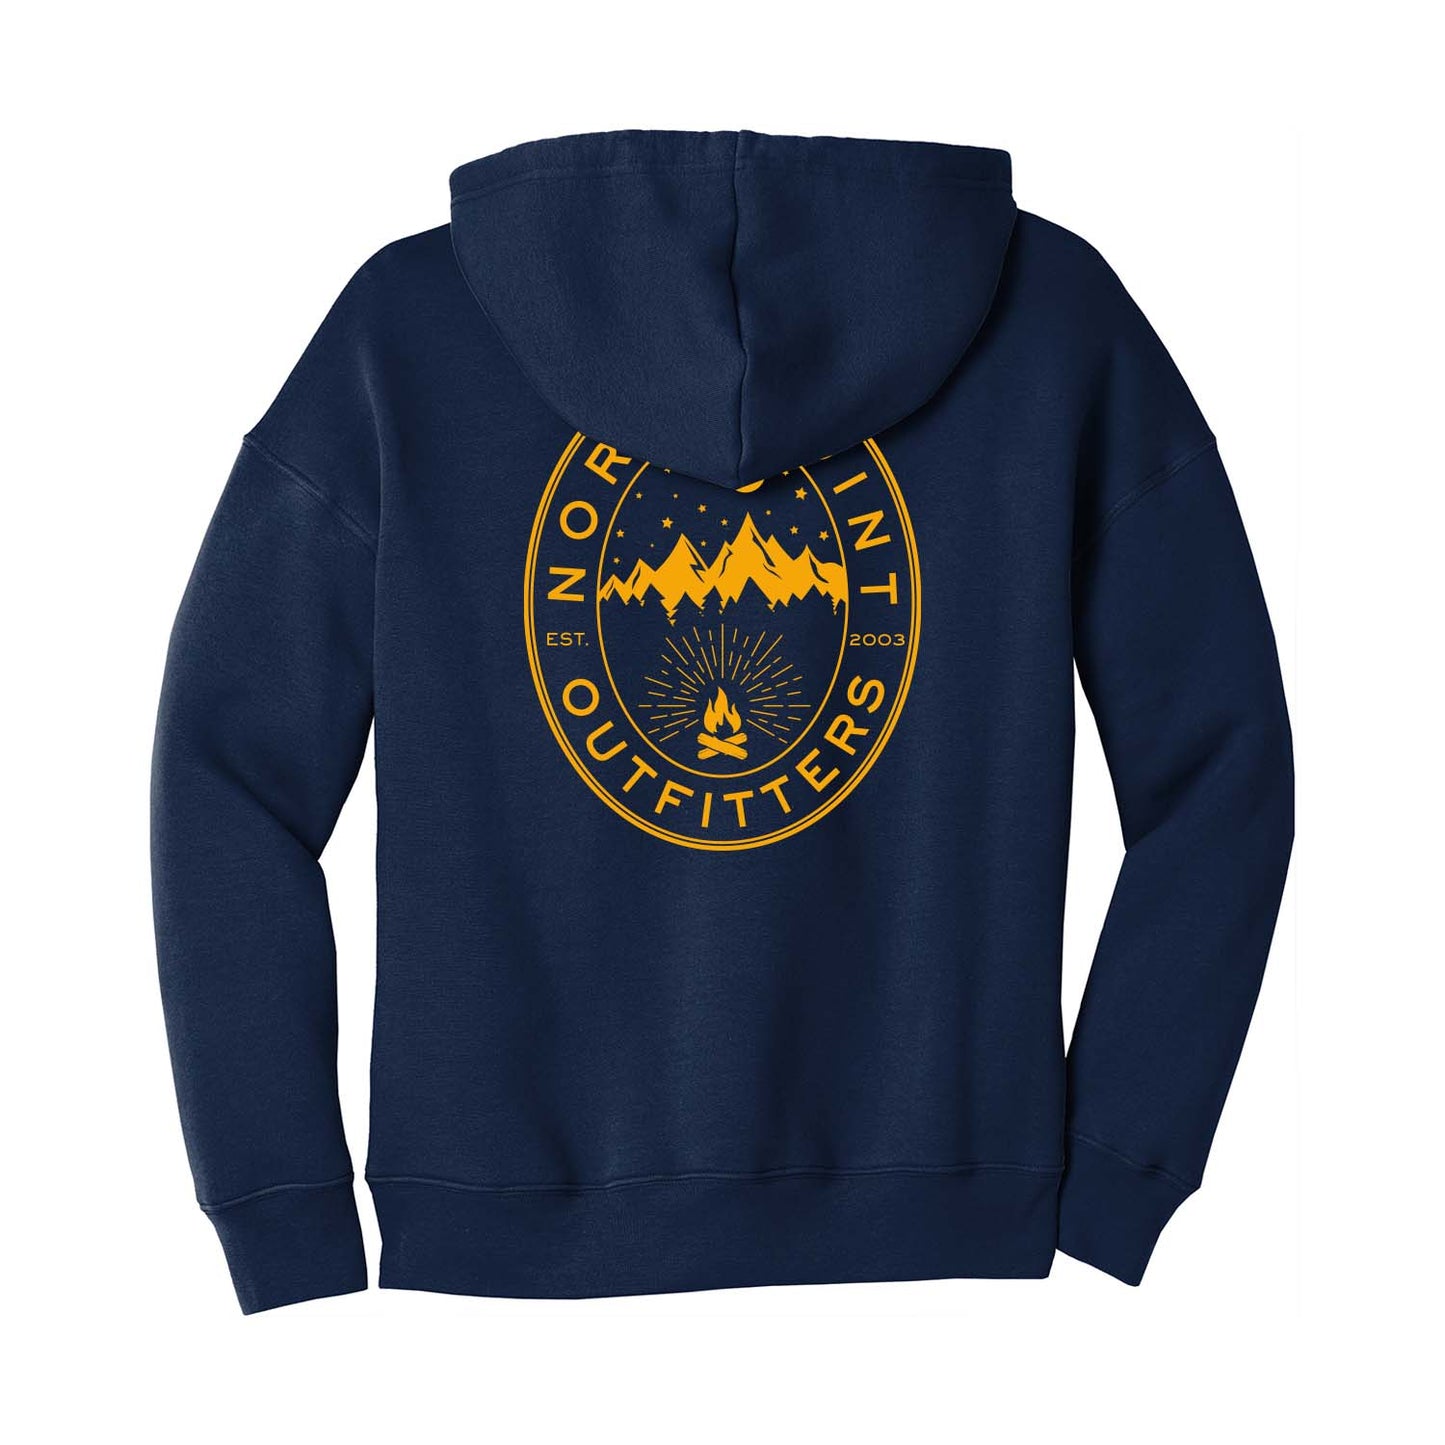 NorthPoint Outfitters Hoodie - Navy